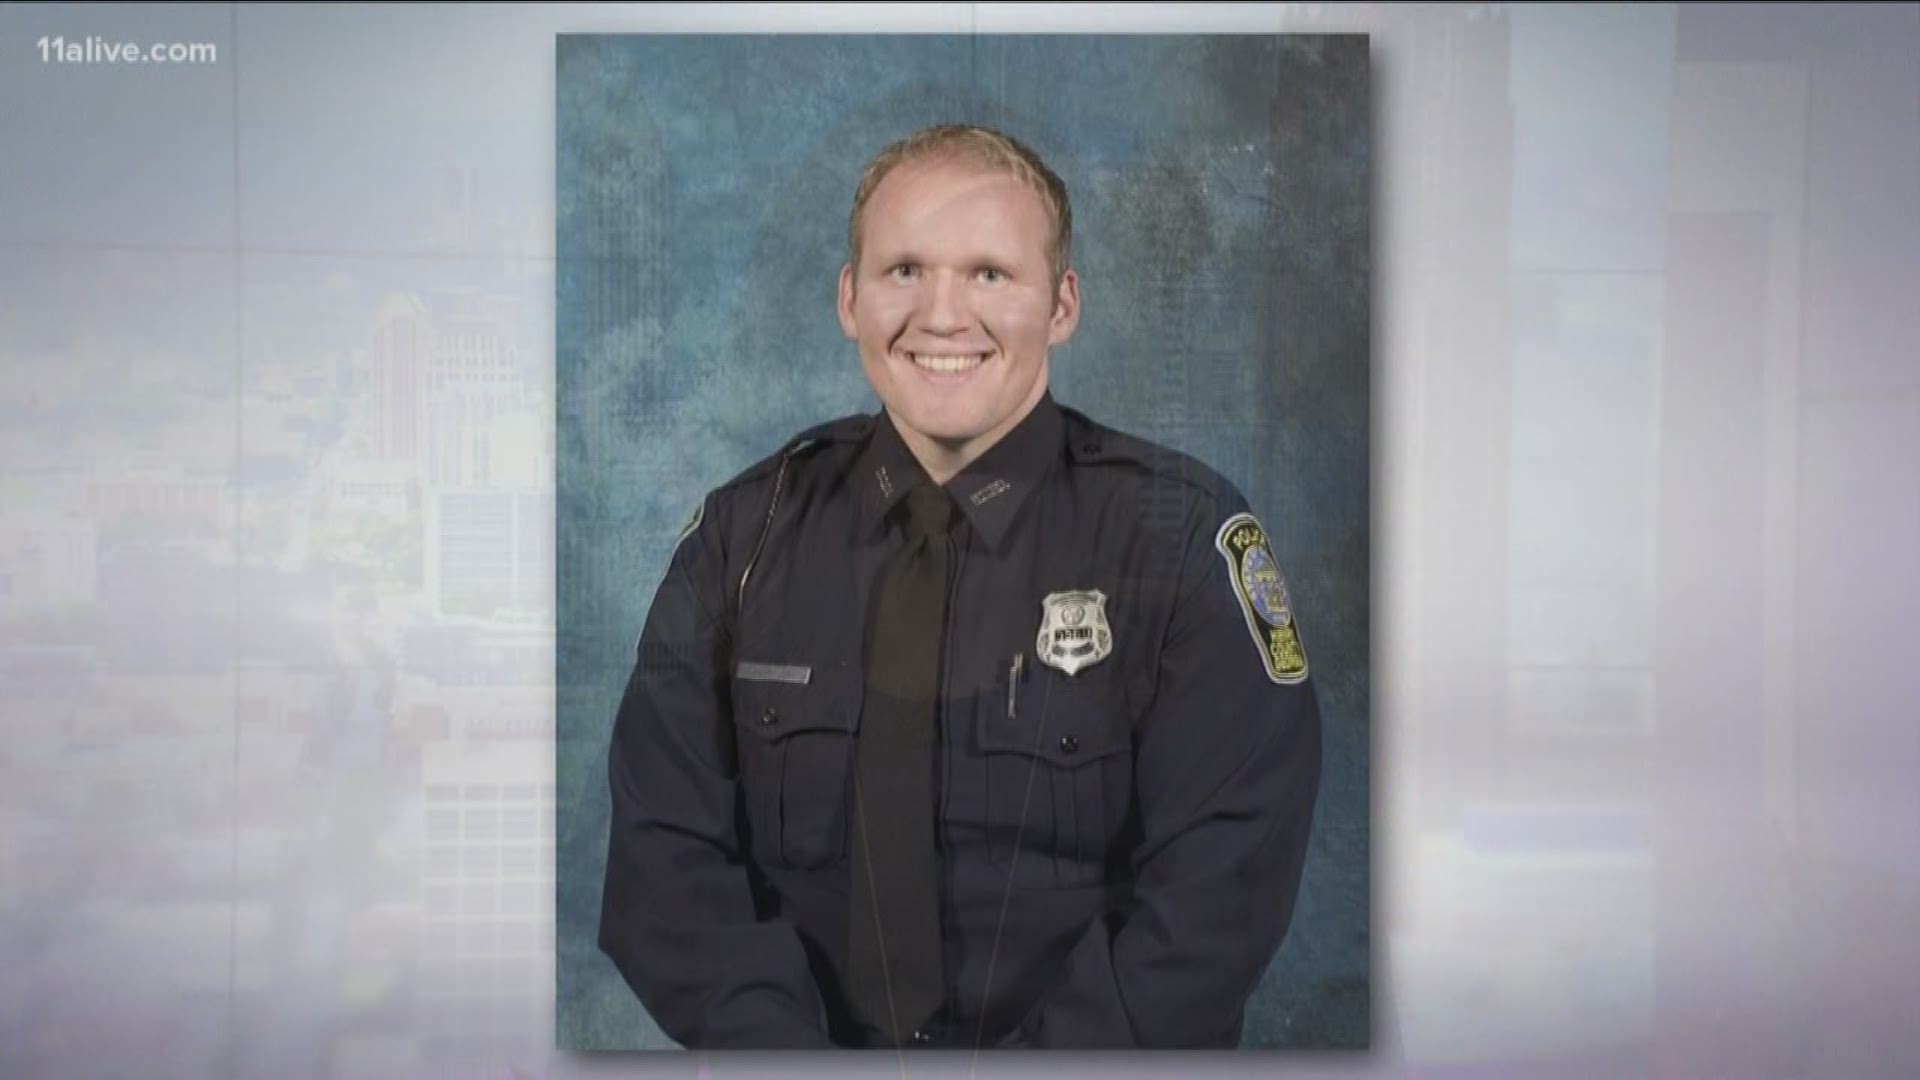 Officer Michael Smith is in critical condition after a struggle with a suspect left him with a gunshot wound in a McDonough dentist's office.